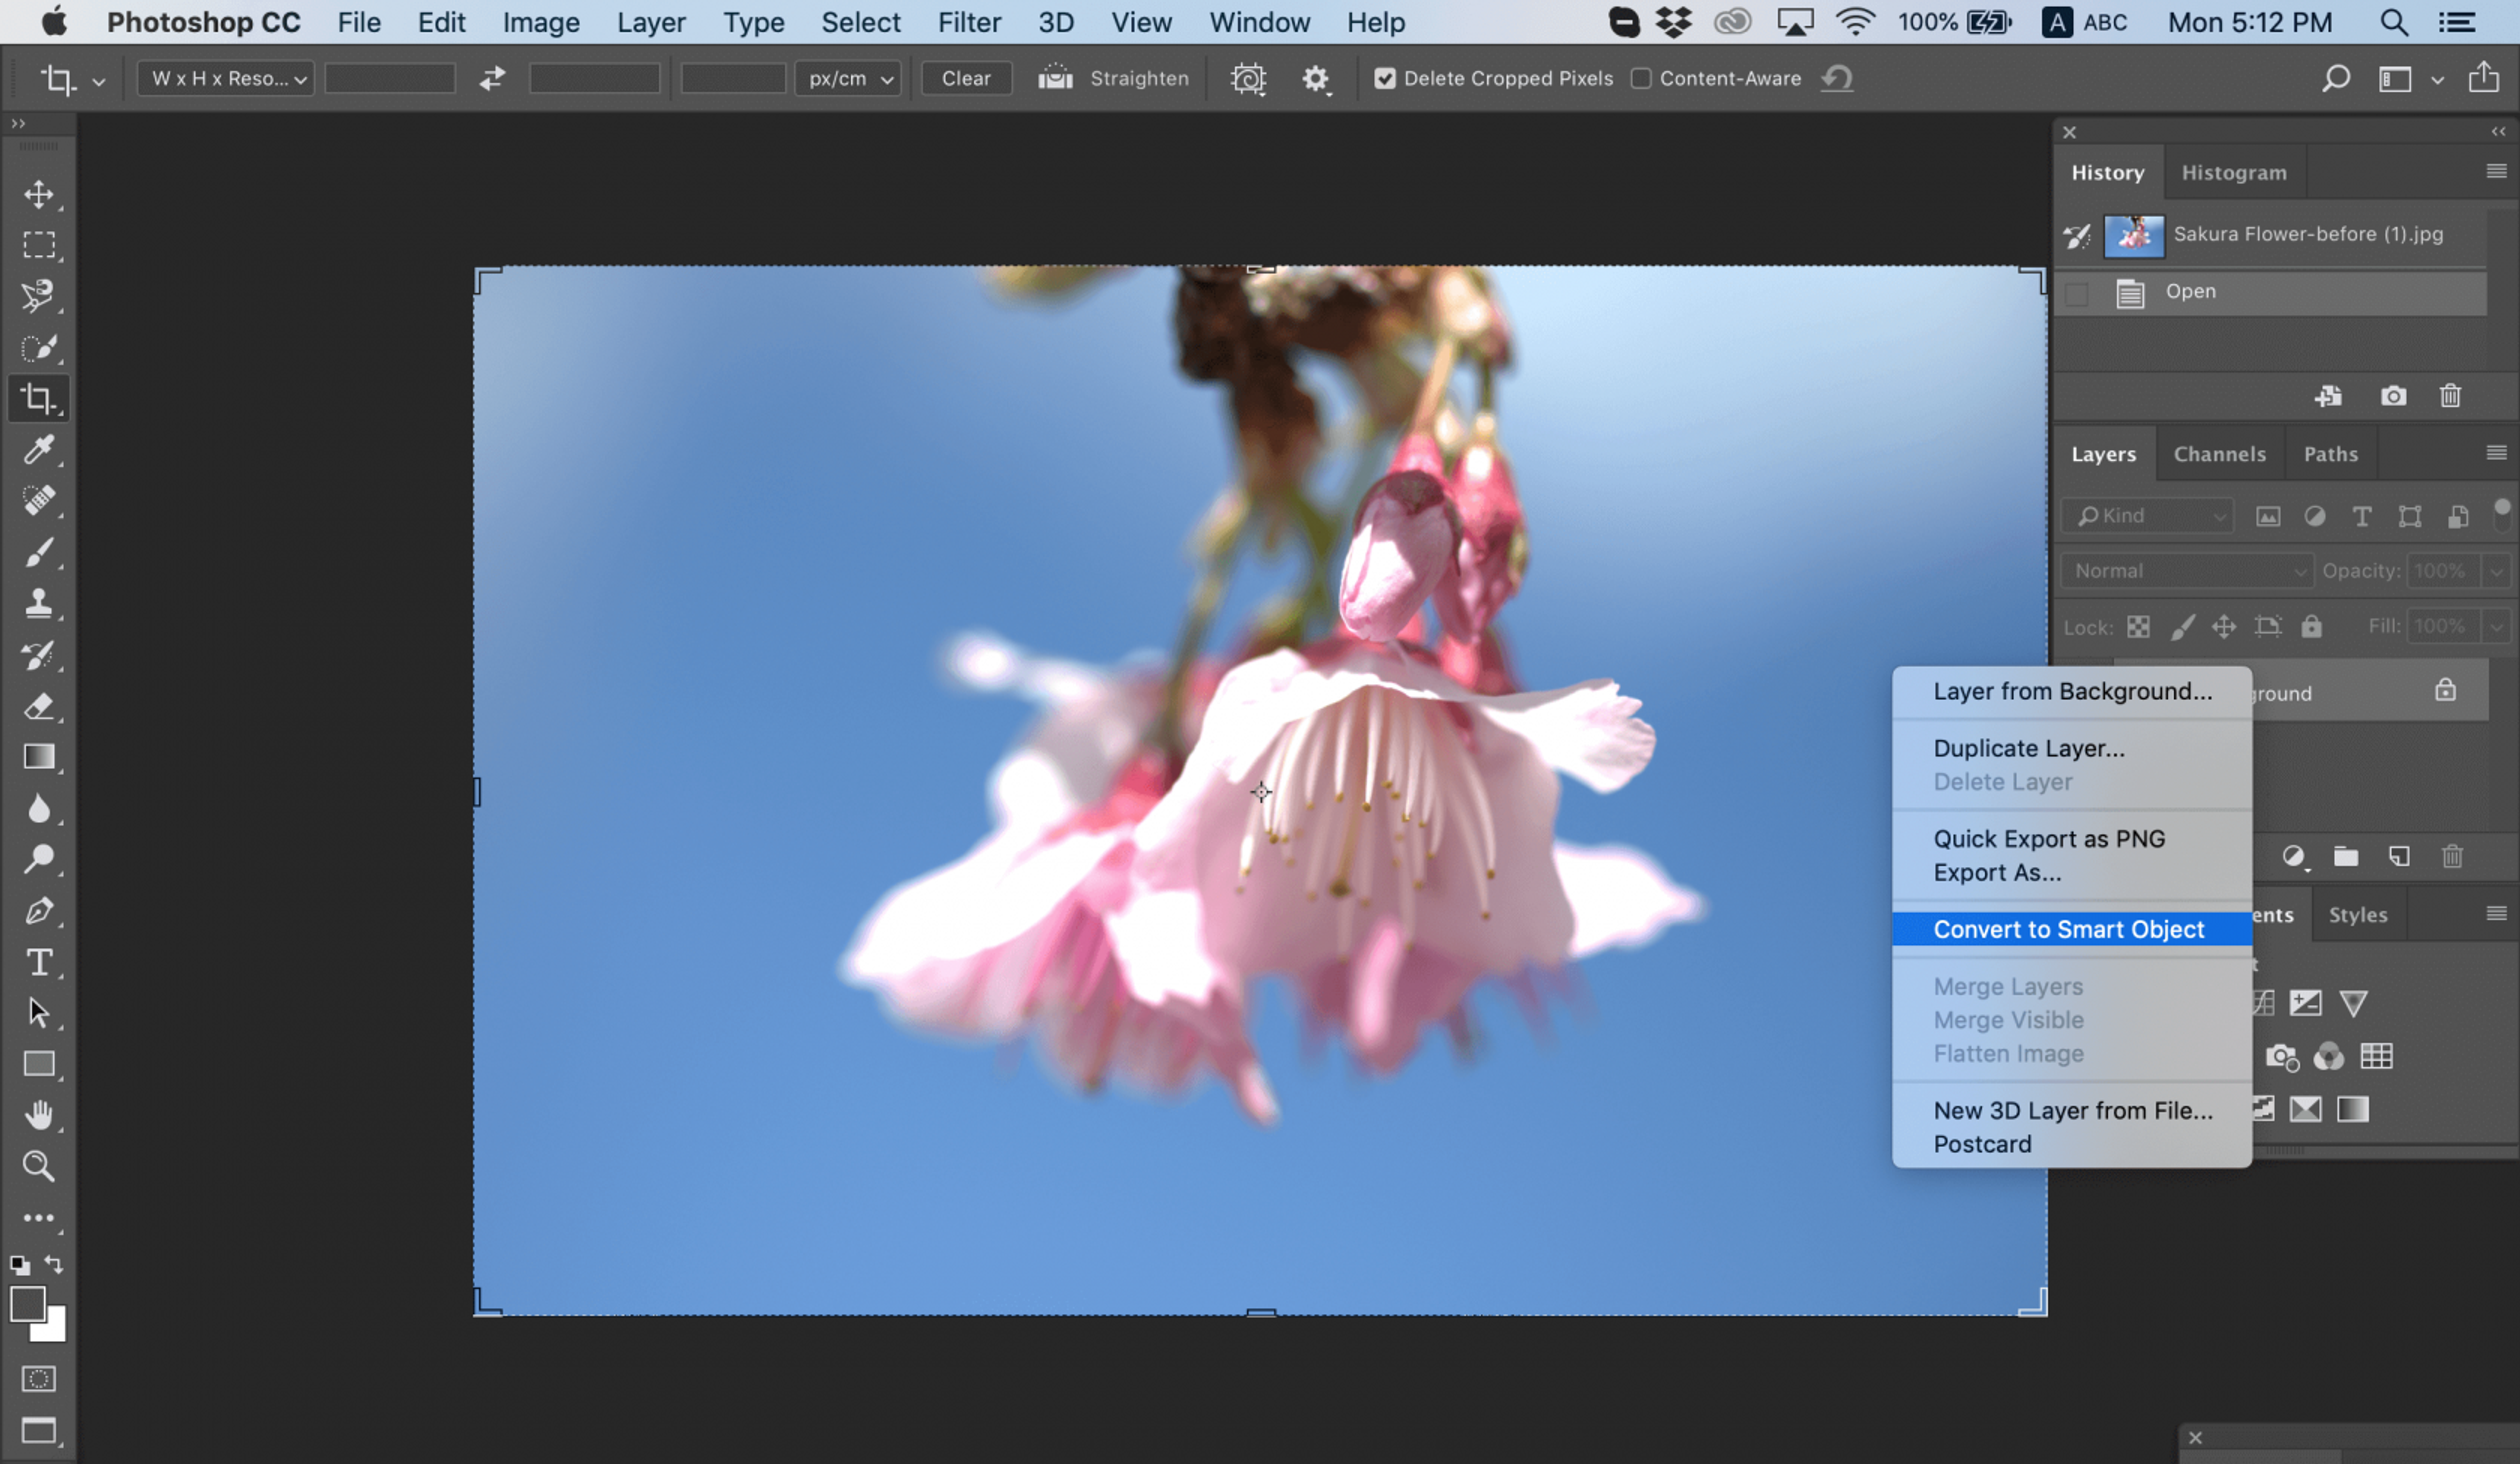 Easily Sharpen Your Image in Photoshop | Skylum How-to